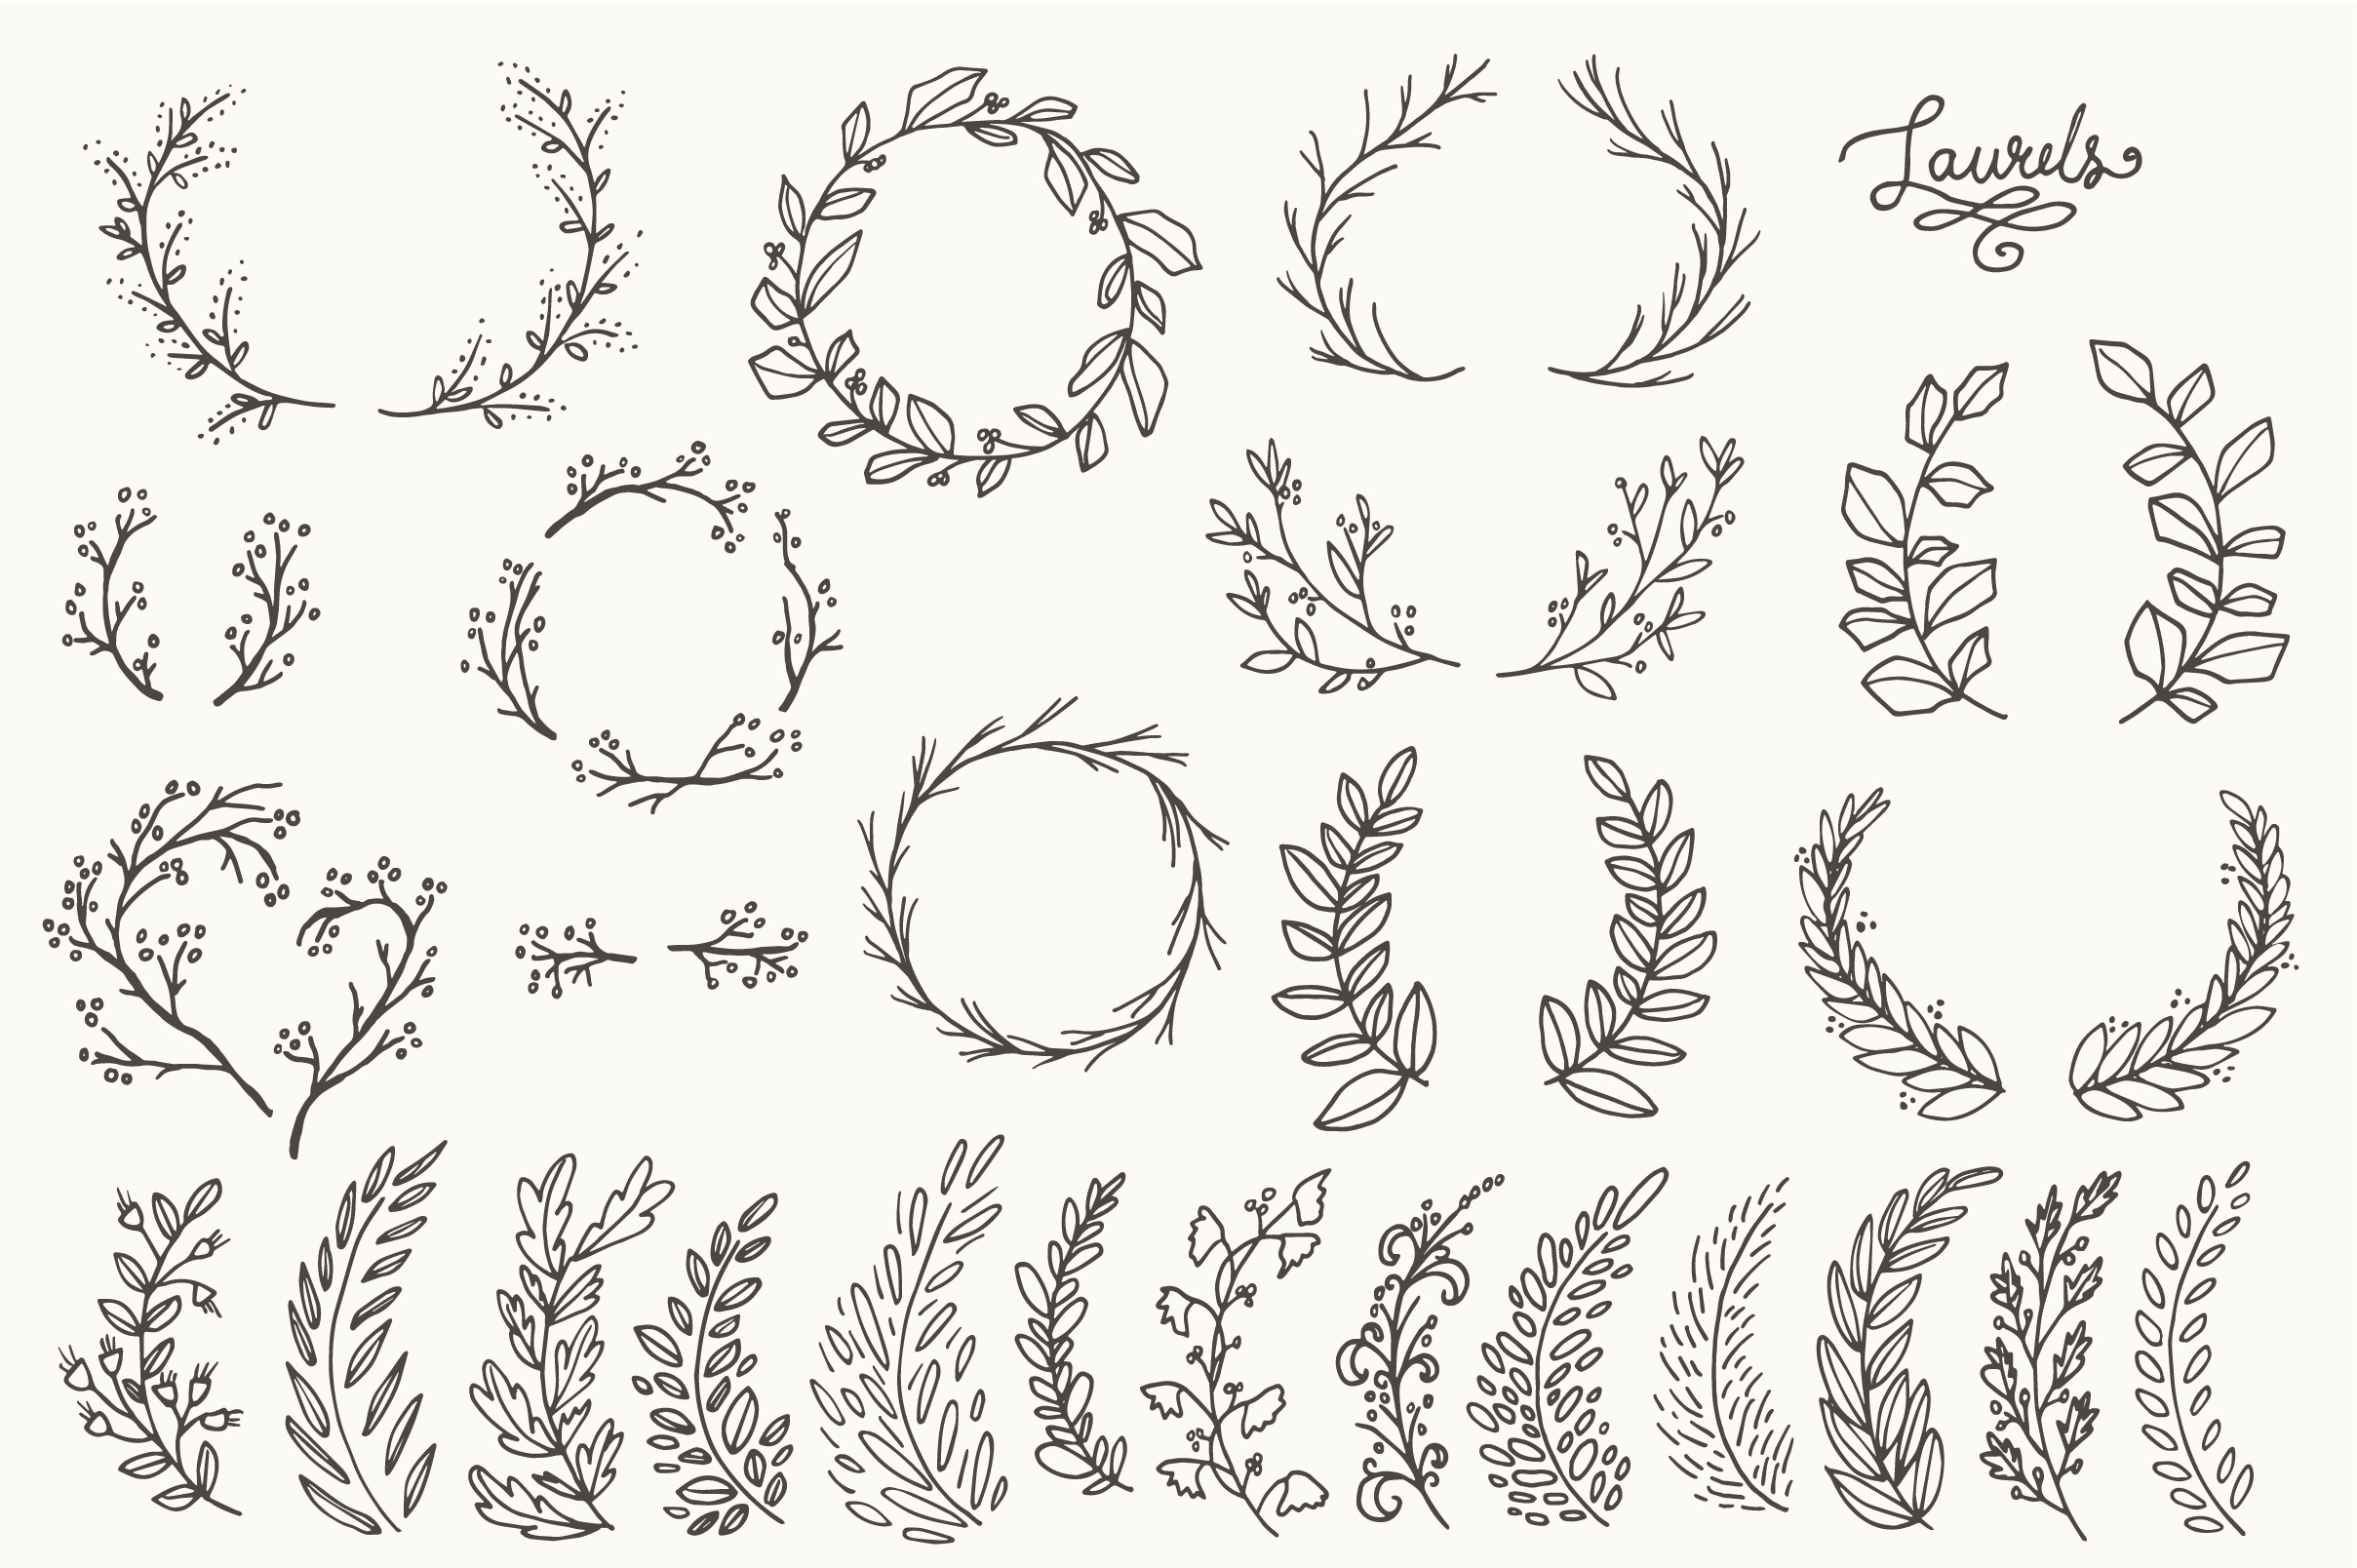 Whimsical Laurels & Wreaths Clip Art ~ Objects on Creative Market